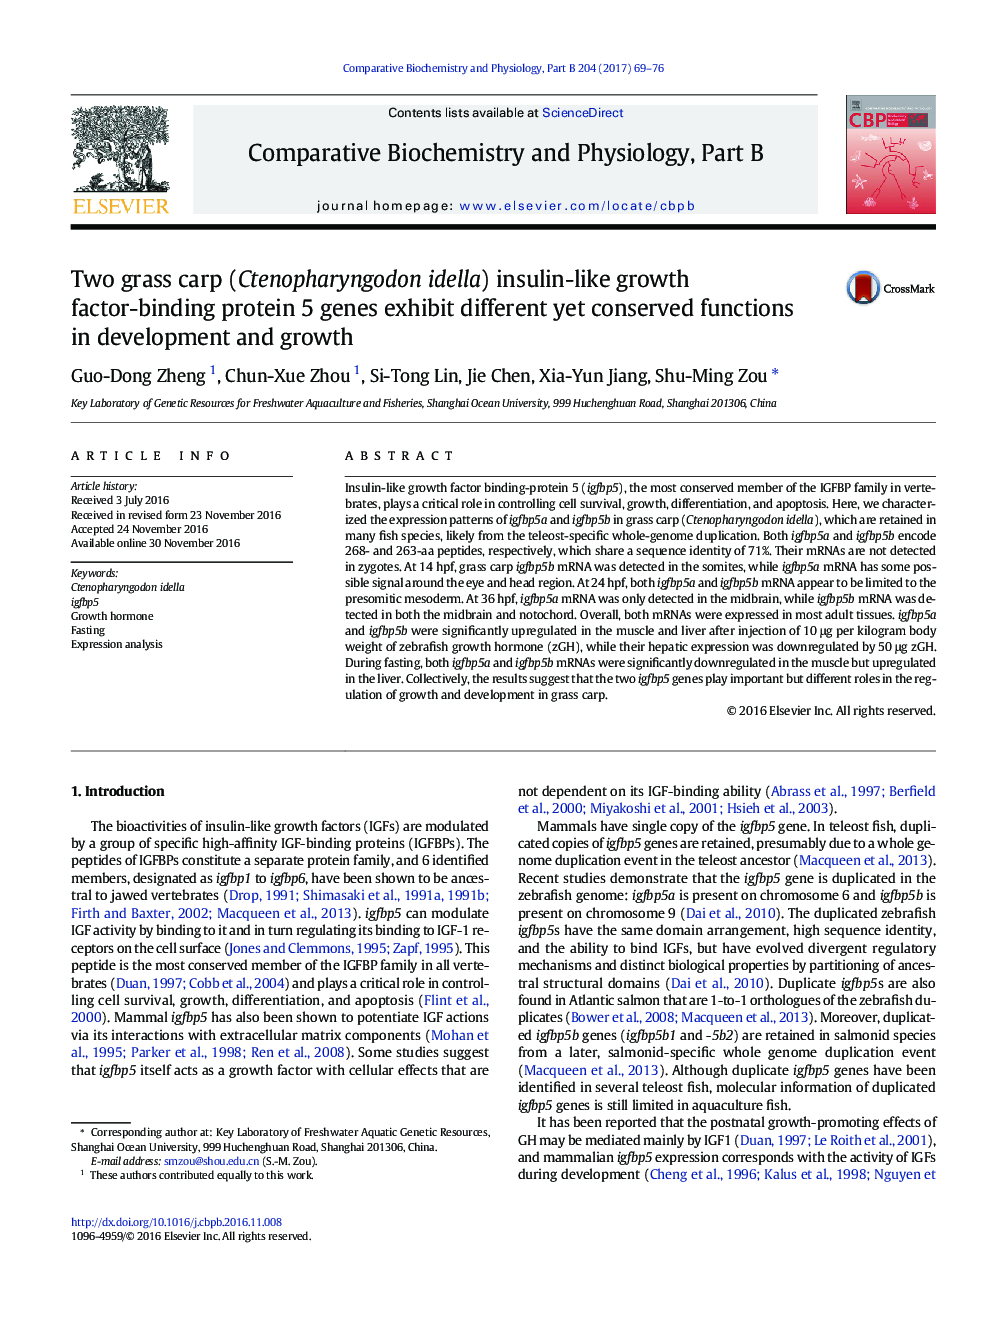 Two grass carp (Ctenopharyngodon idella) insulin-like growth factor-binding protein 5 genes exhibit different yet conserved functions in development and growth